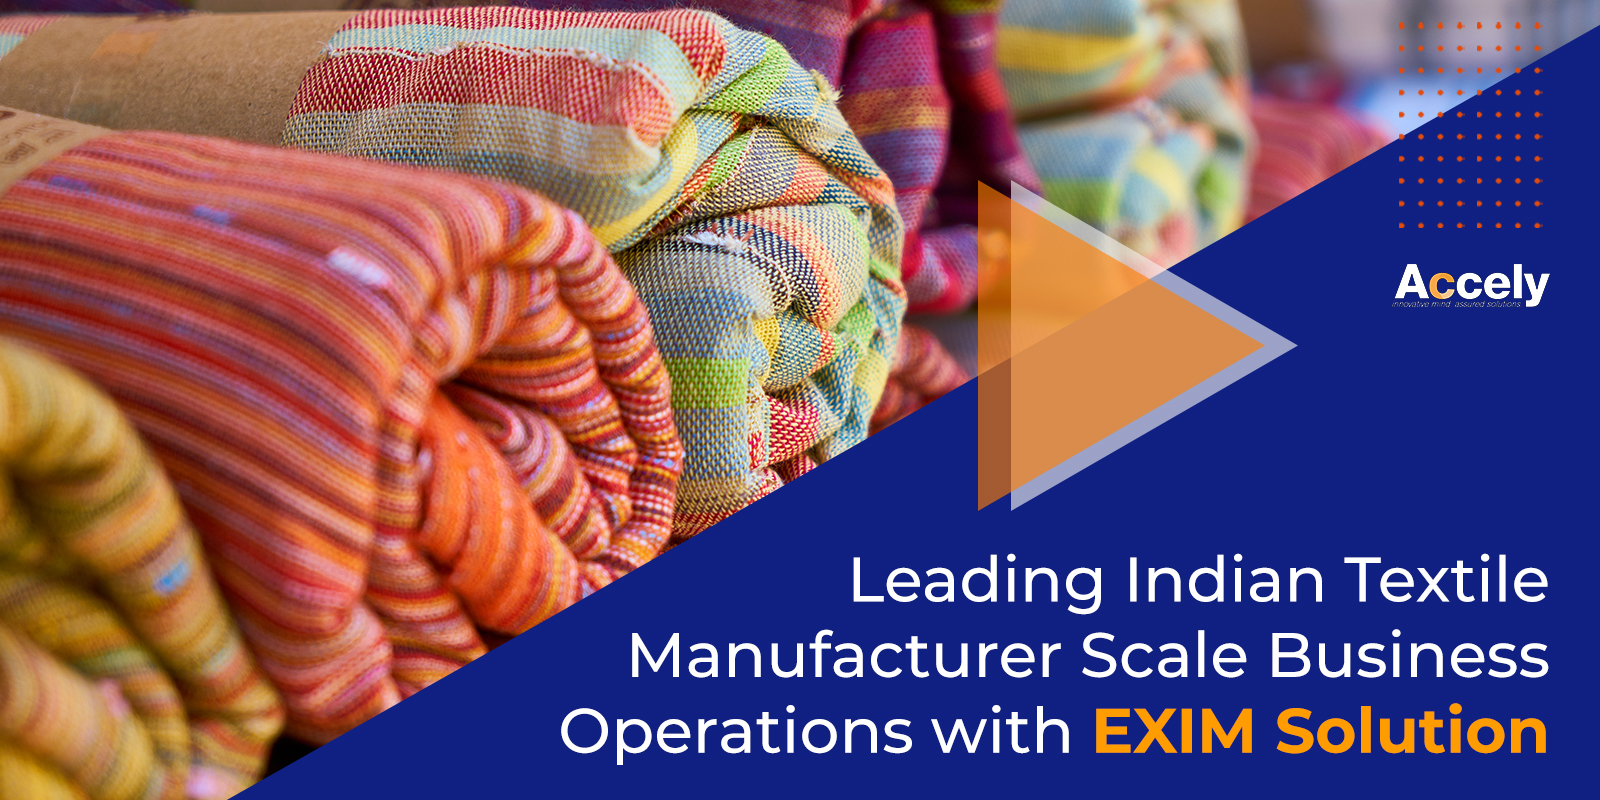 Leading Indian Textile Manufacturer Scale Business Operations with EXIM Solution